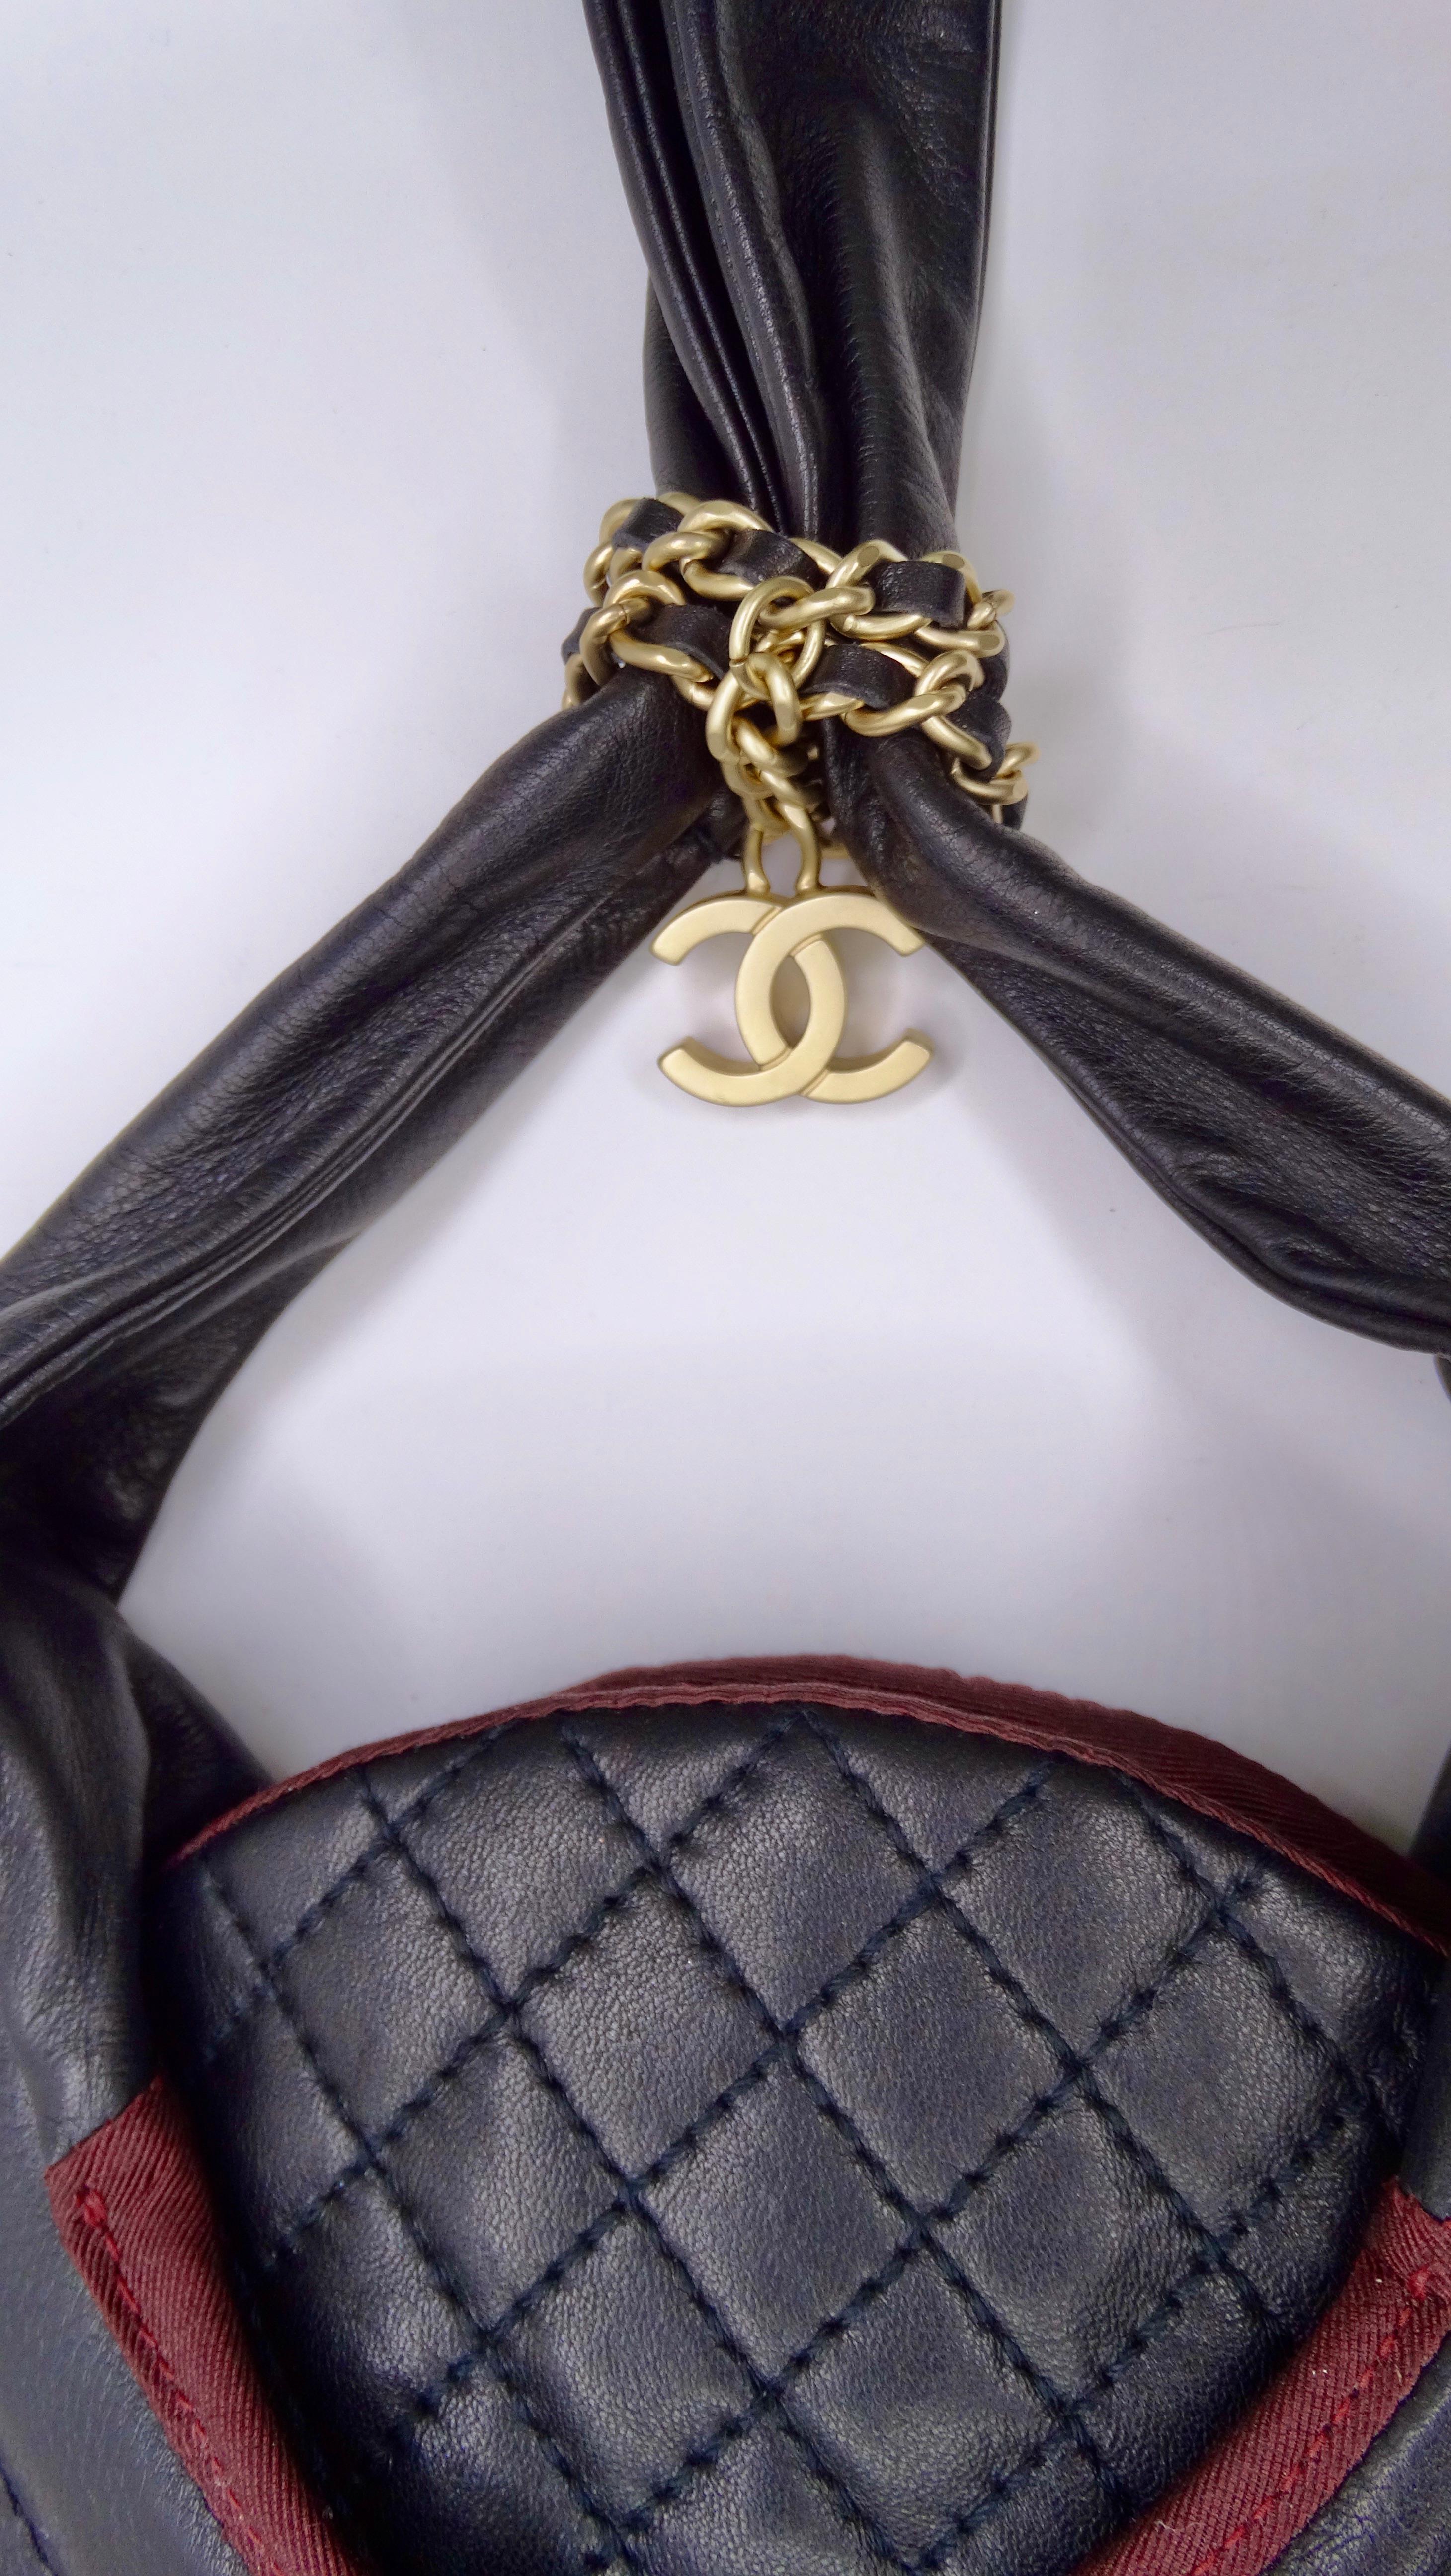 Chanel Lambskin Evening Handbag In Excellent Condition For Sale In Scottsdale, AZ